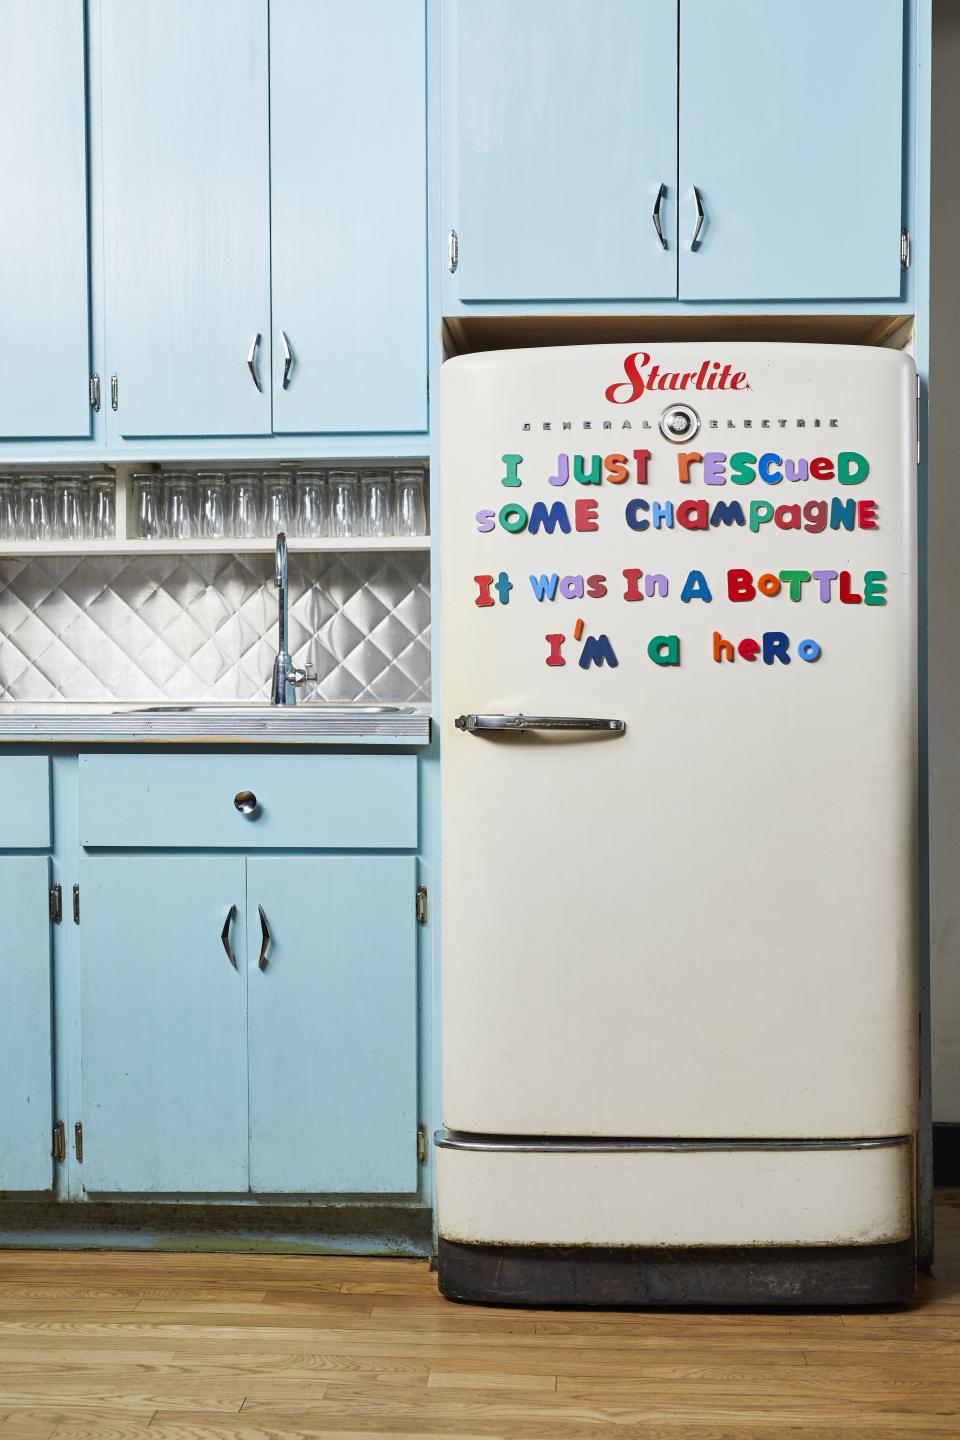 The small fridge covered in those clunky, colorful magnetic letters wisely spits out life’s bittersweet truths for patrons to enjoy alongside their $4 ’Gansetts.